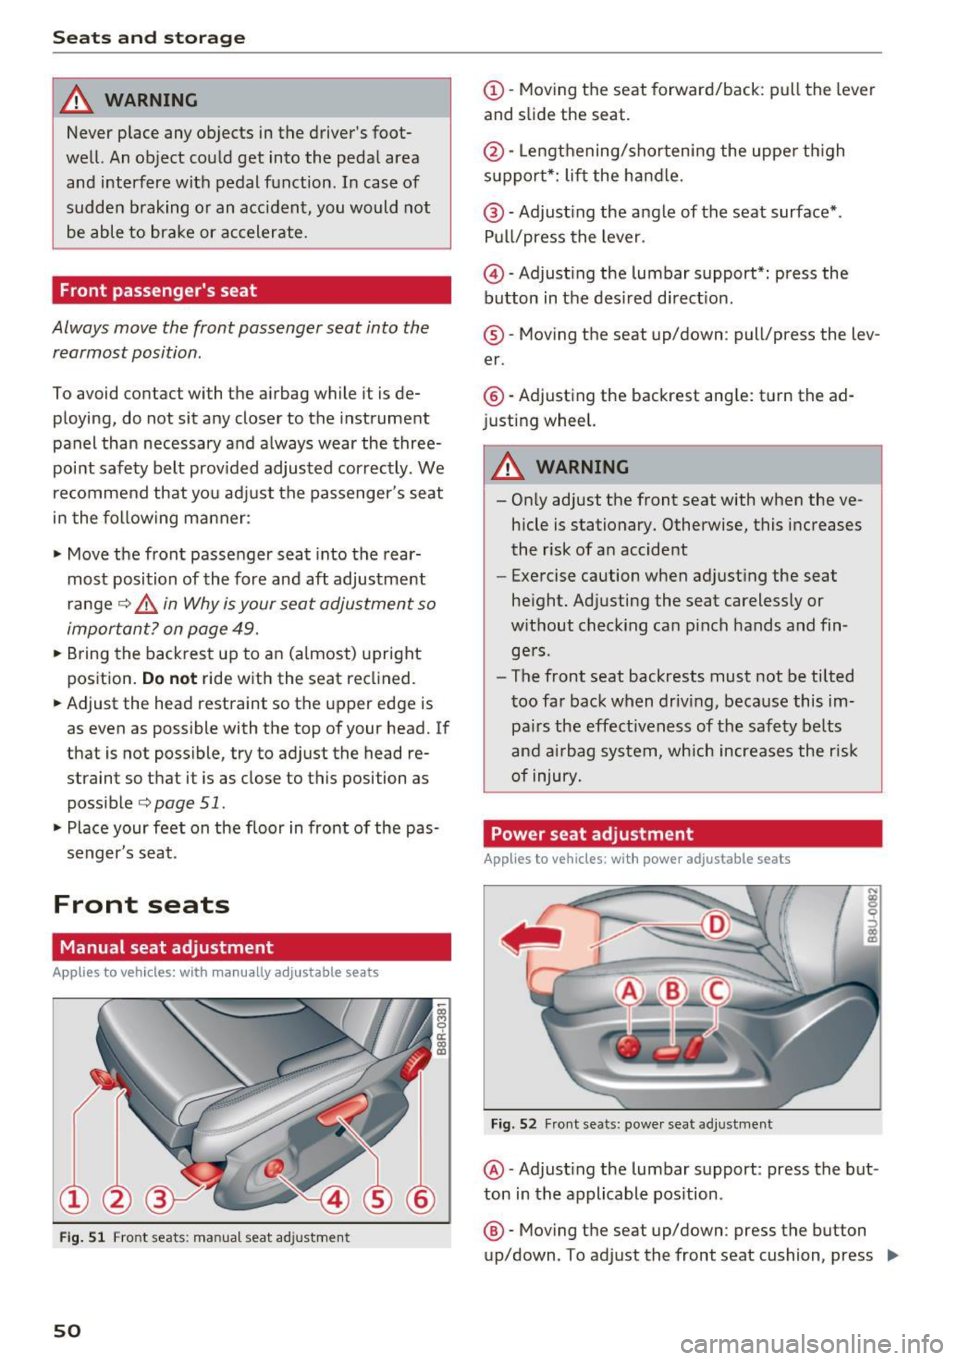 AUDI Q3 2016  Owners Manual Seats  and storage 
_& WARNING 
Never place  any objects  in the  drivers  foot­
well.  An object  could  get  into  the  pedal  area  and  interfere  with  pedal  function.  In  case  of 
sudden  b